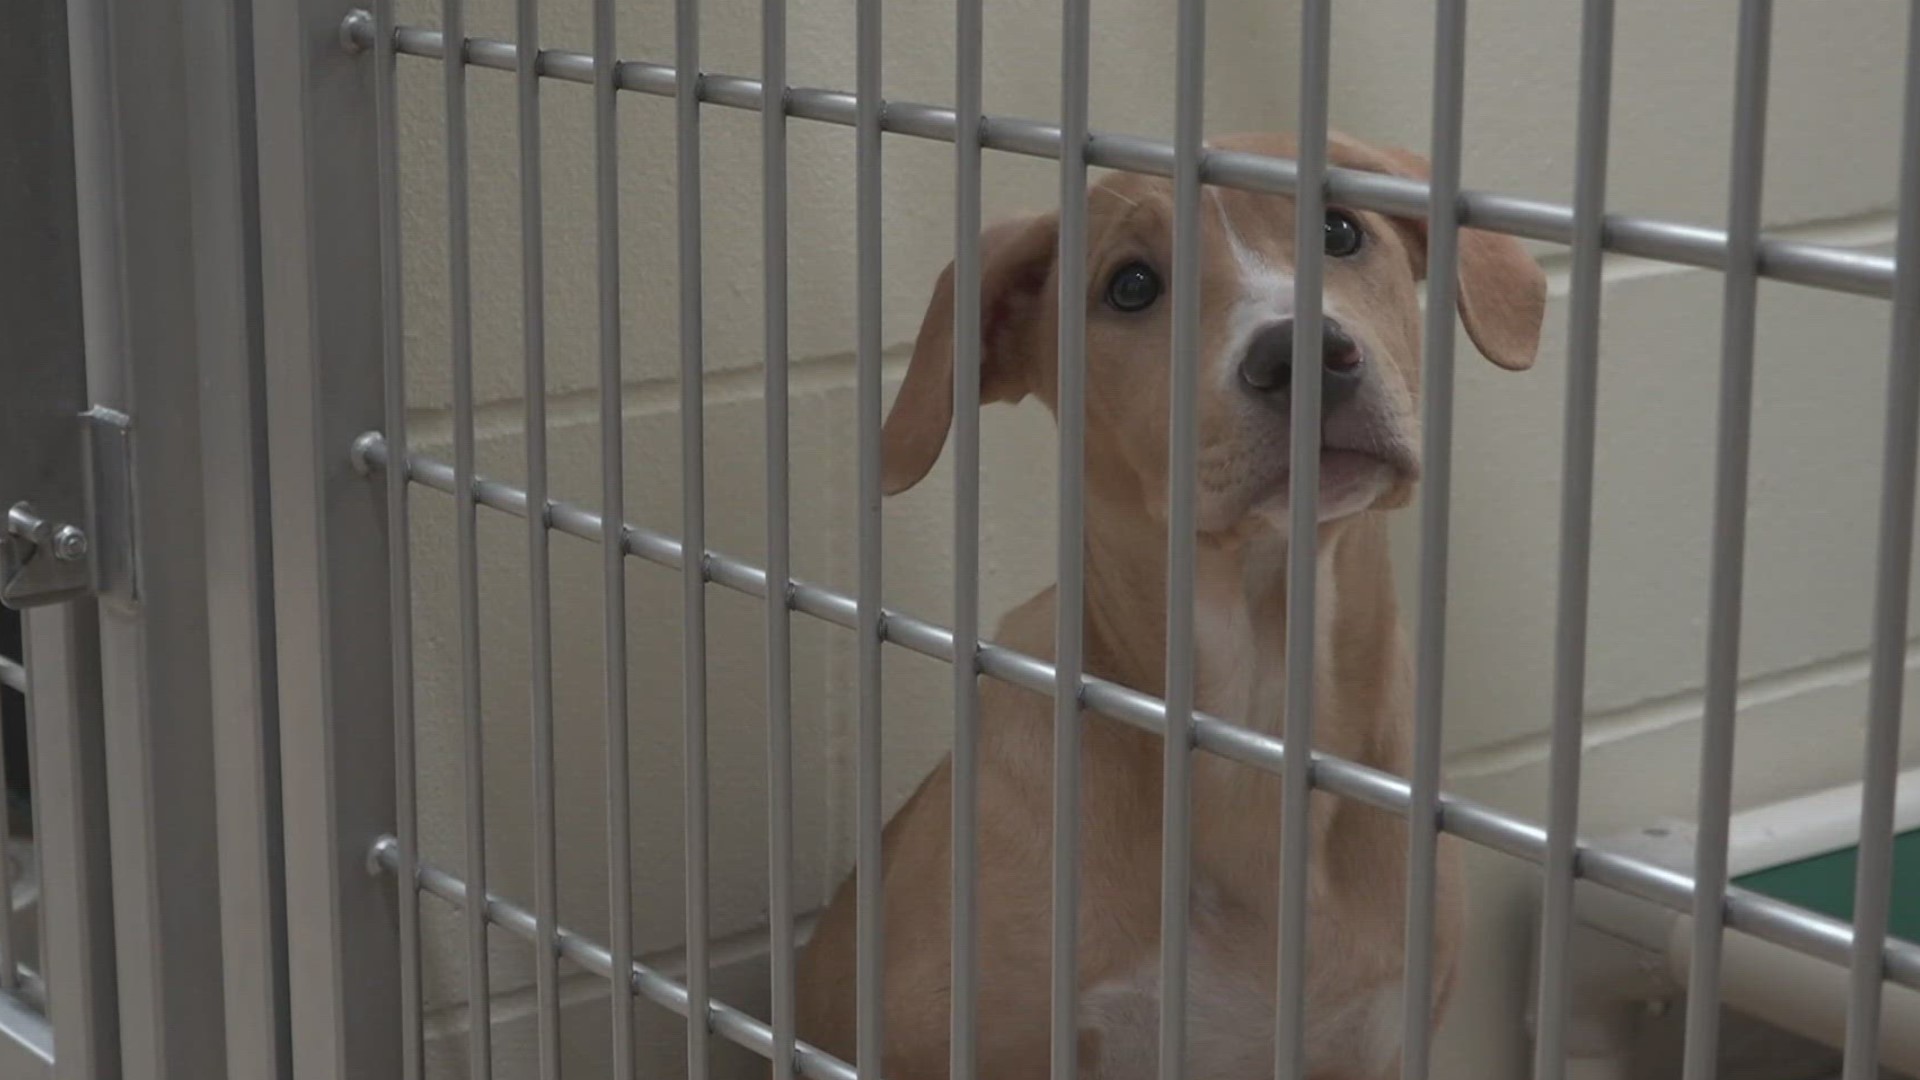 Officials with the Minneapolis Animal Care and Control say adoptions are up, but its not enough to make up for the increase in animals coming into the shelter.